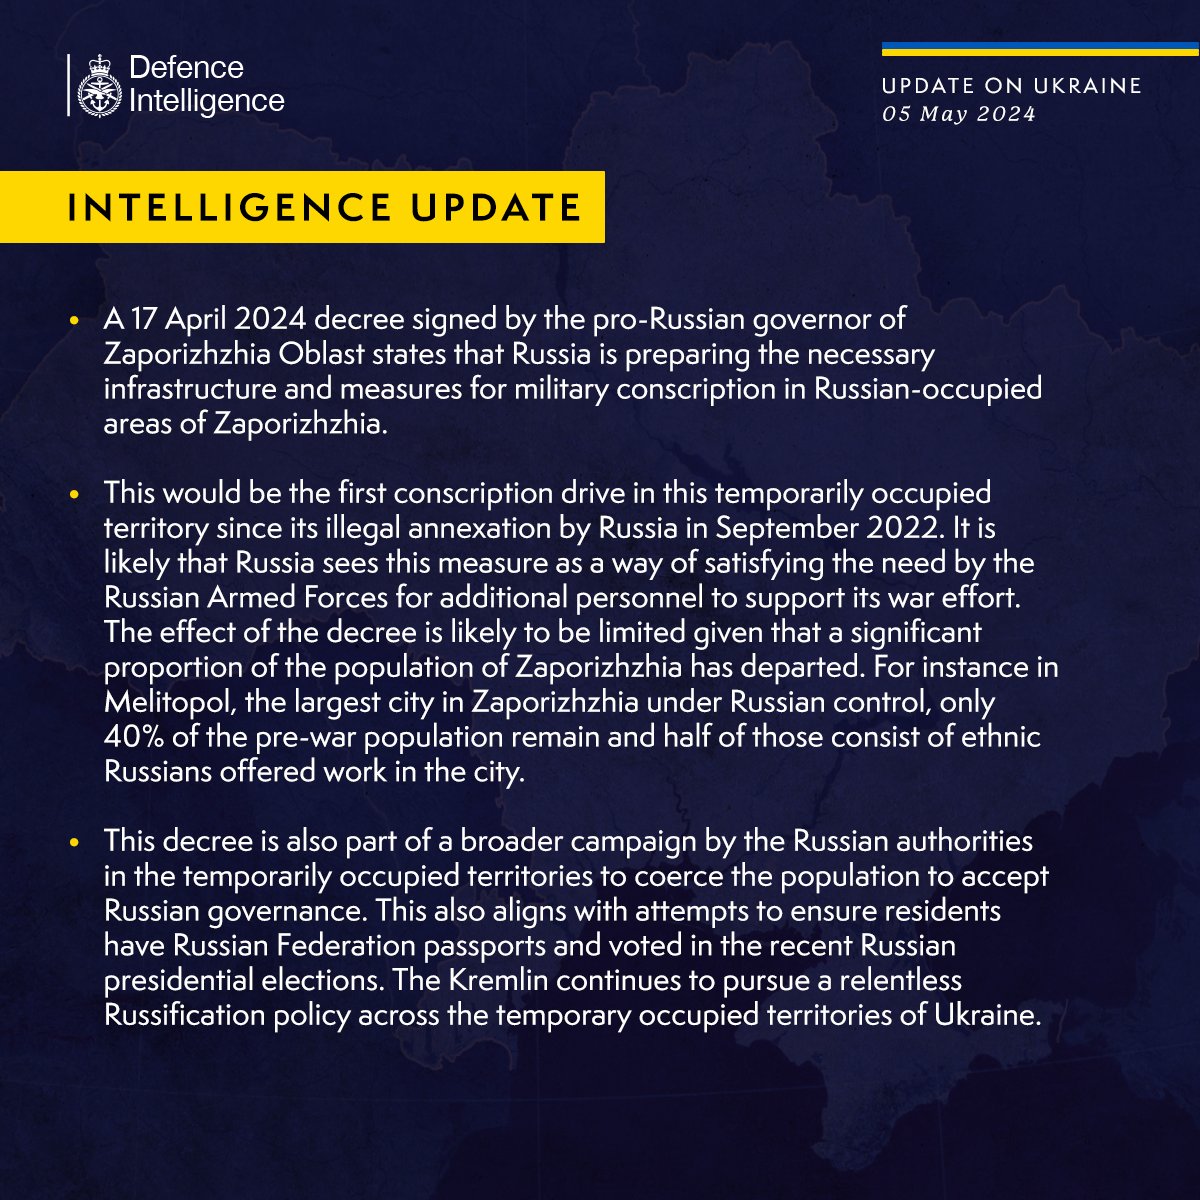 Latest Defence Intelligence update on the situation in Ukraine – 05 May 2024. Find out more about Defence Intelligence's use of language: ow.ly/z5Bq50RwAgB #StandWithUkraine 🇺🇦